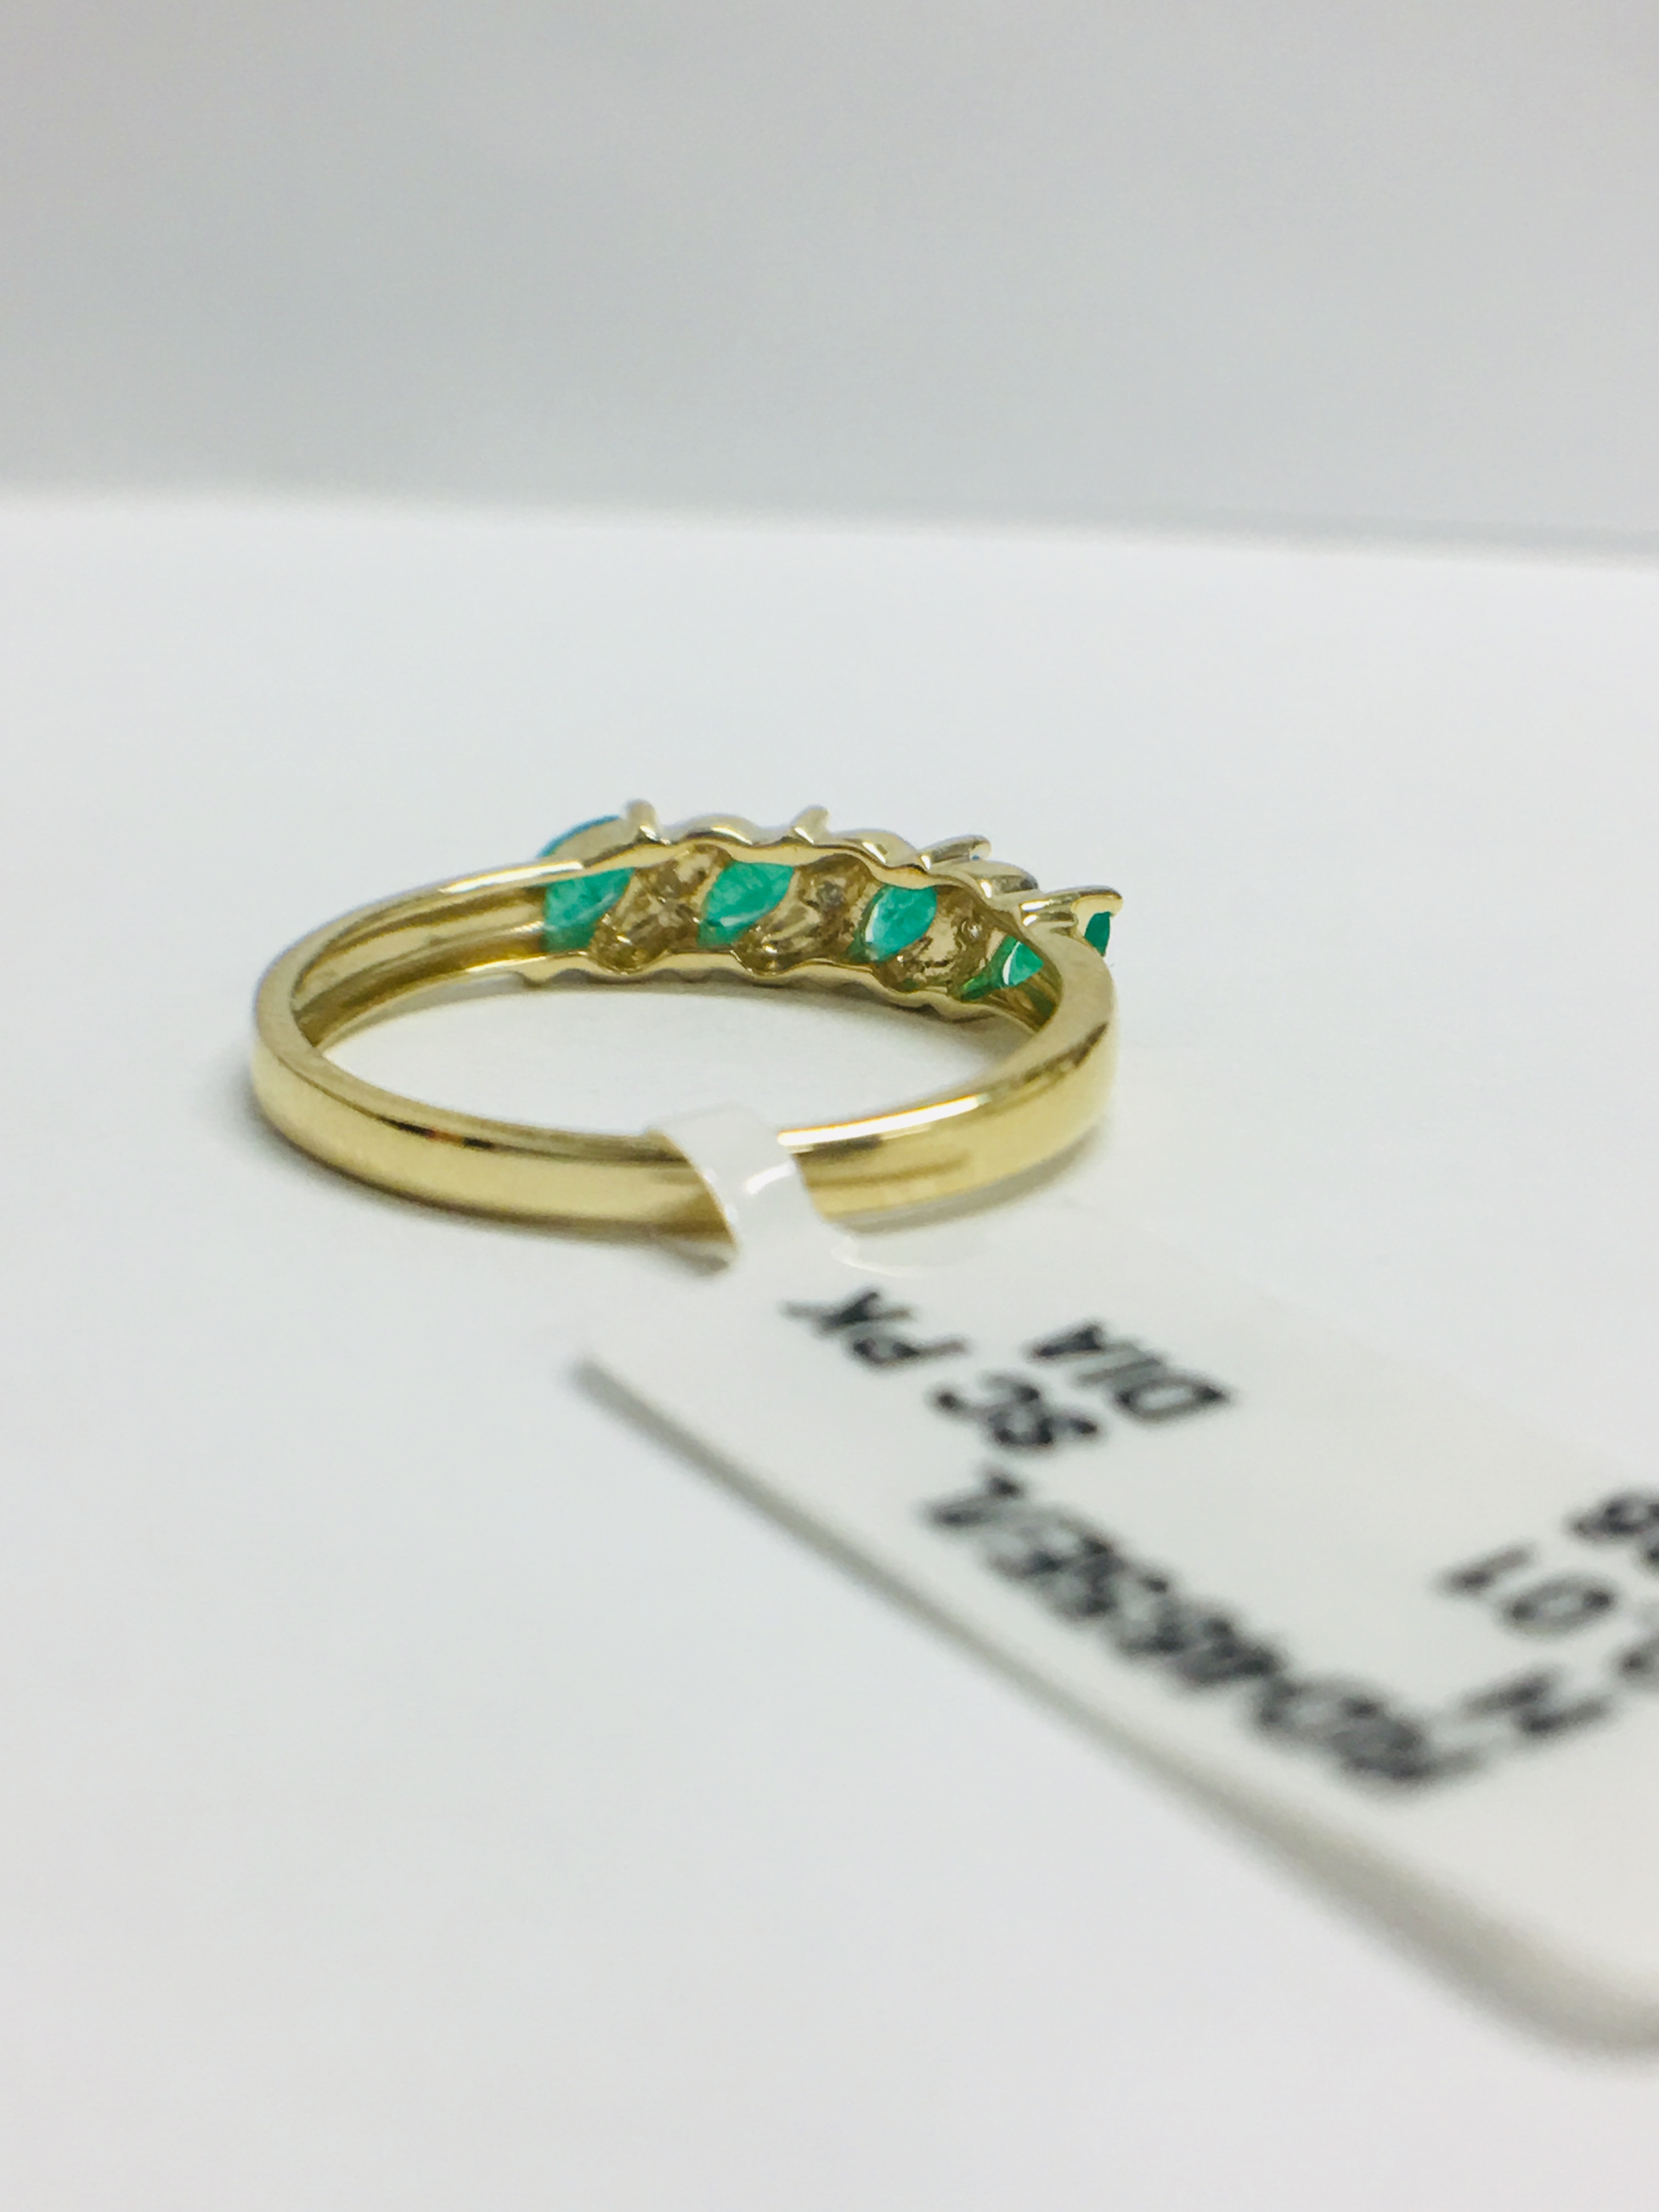 9ct yellow gold emerald and diamond ring - Image 7 of 11